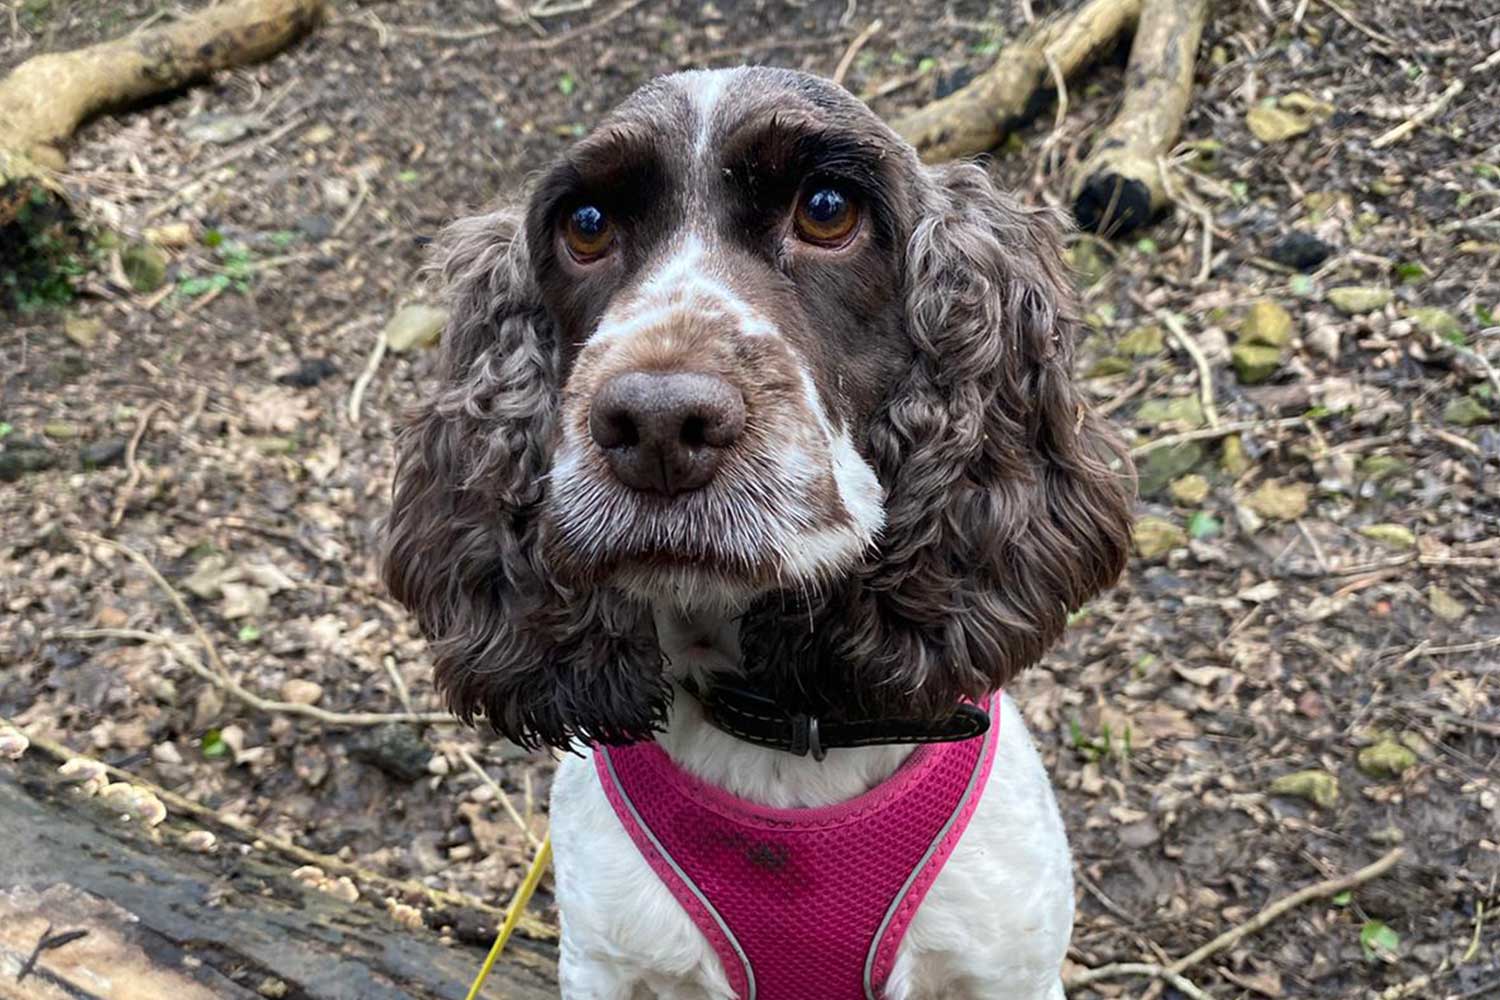 A brown and white spaniel wearing a pink harness